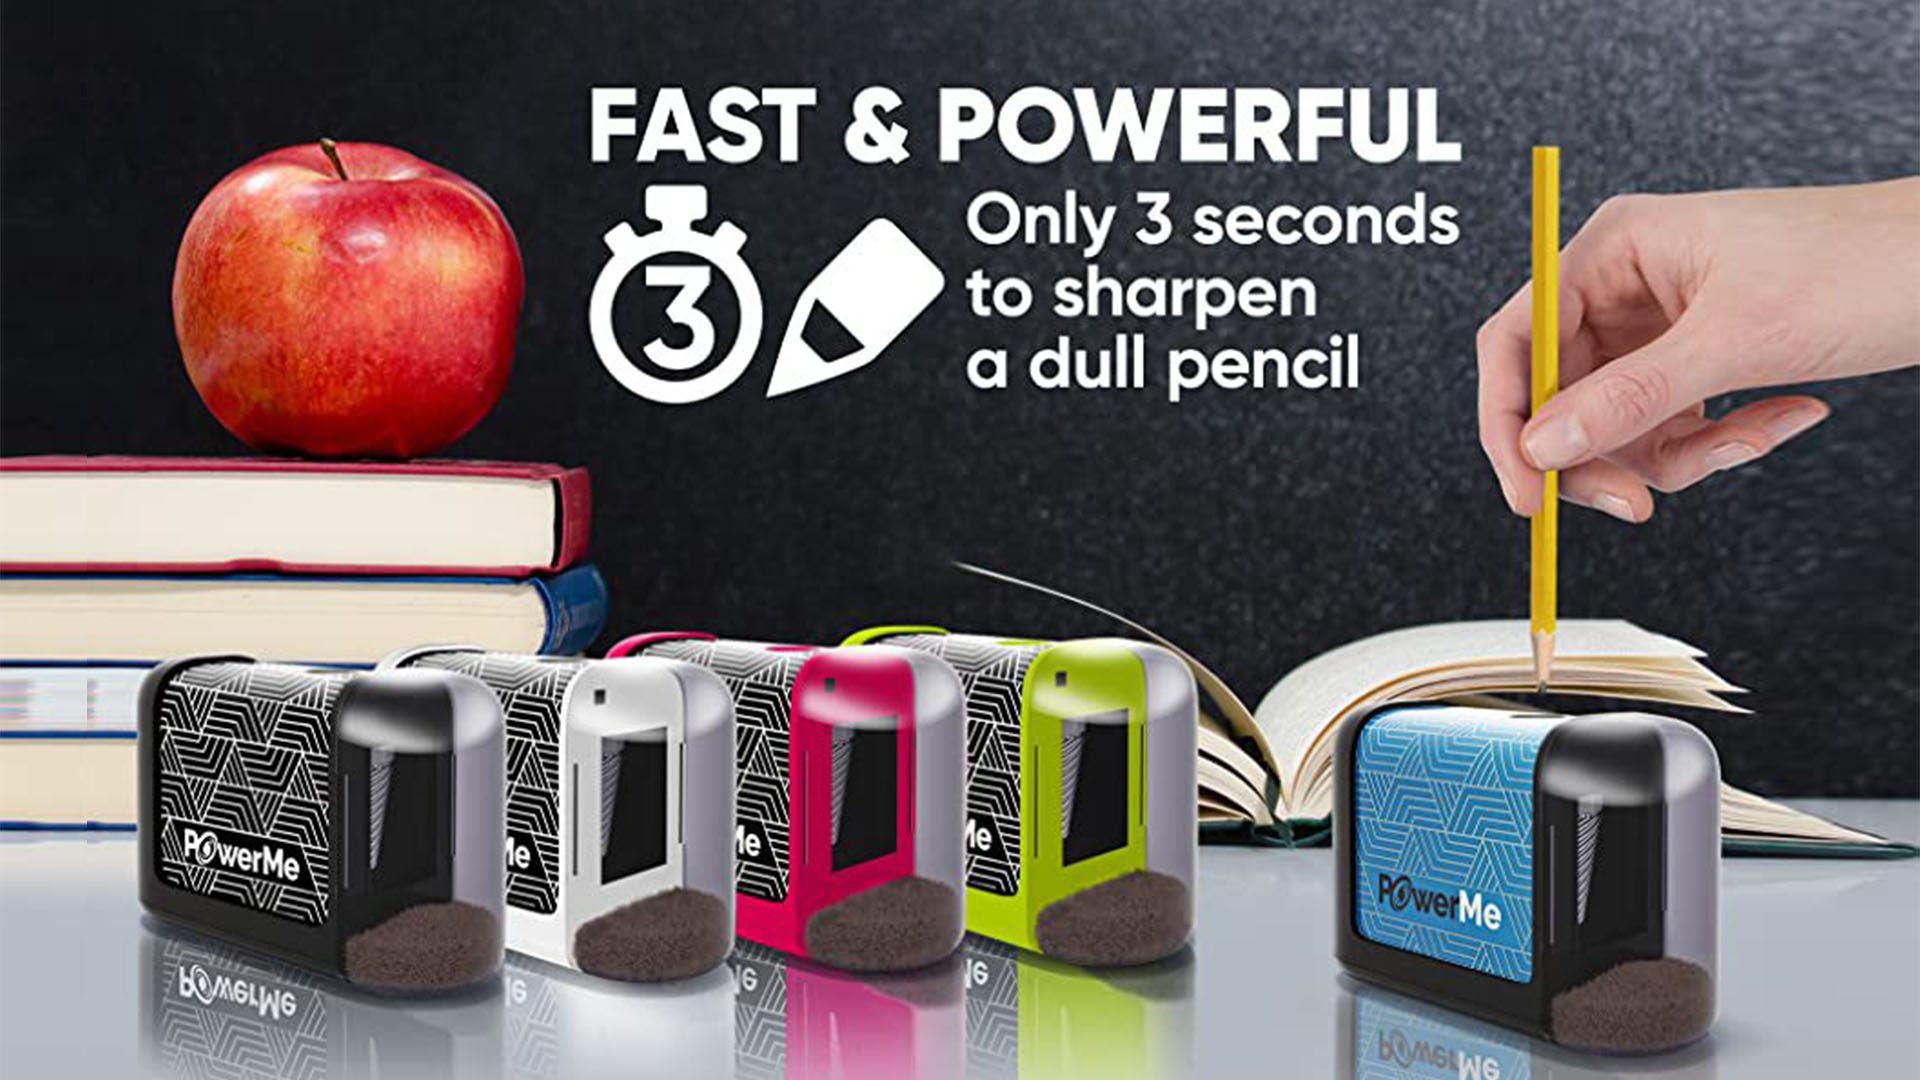 6 Innovative Back To School Products 2022 - TOMORROW'S WORLD TODAY®